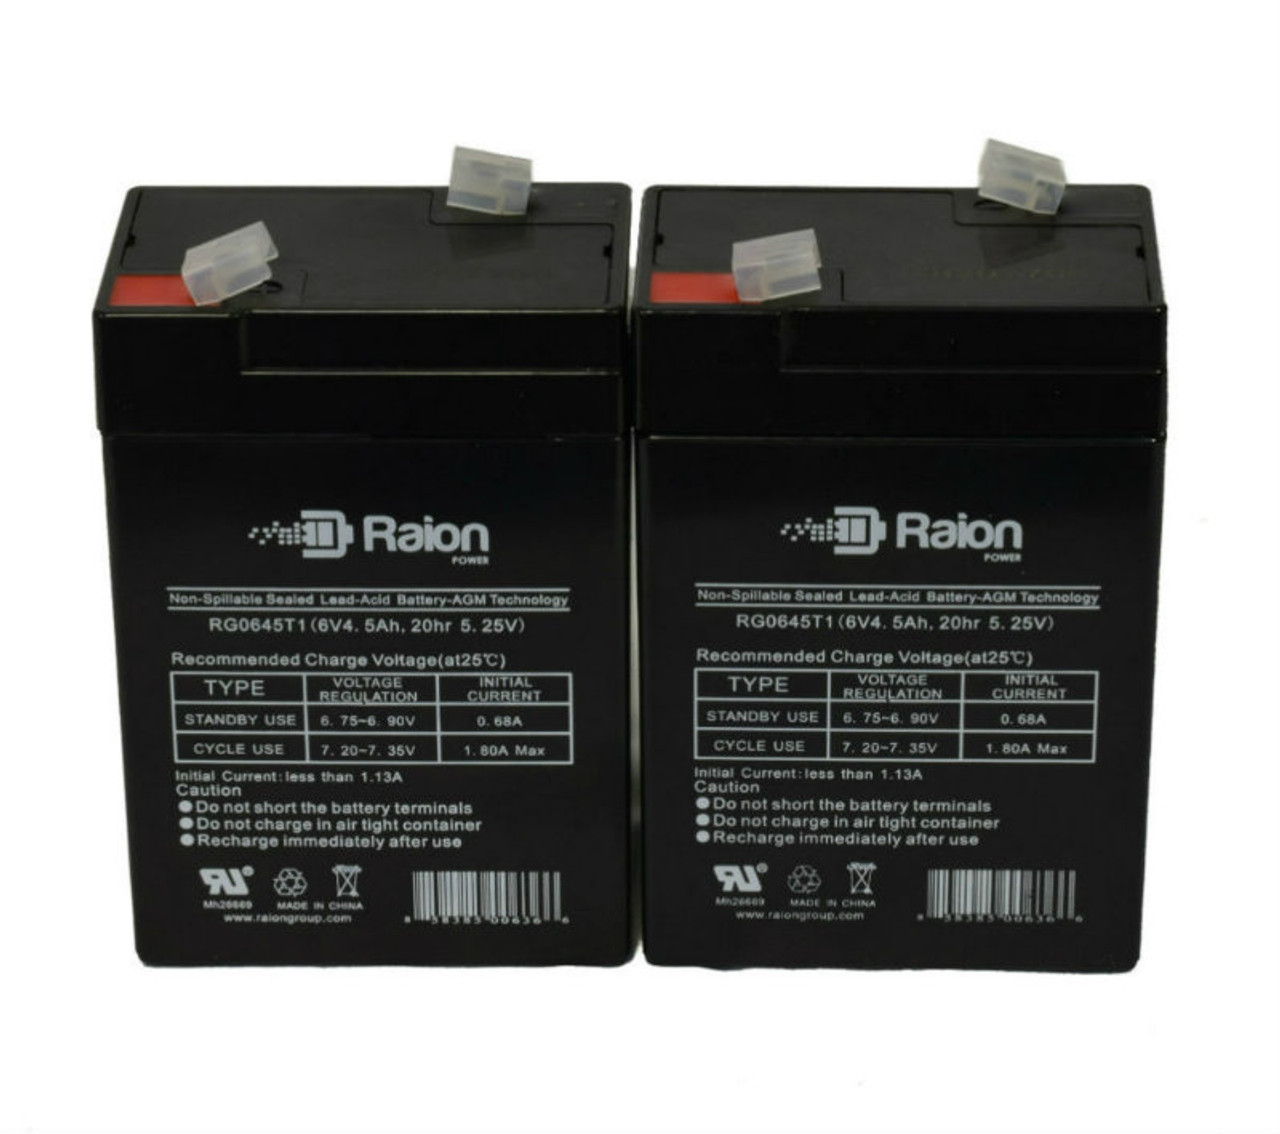 Raion Power 6 Volt 4.5Ah RG0645T1 Replacement Battery for Expocell P206/40 - 2 Pack